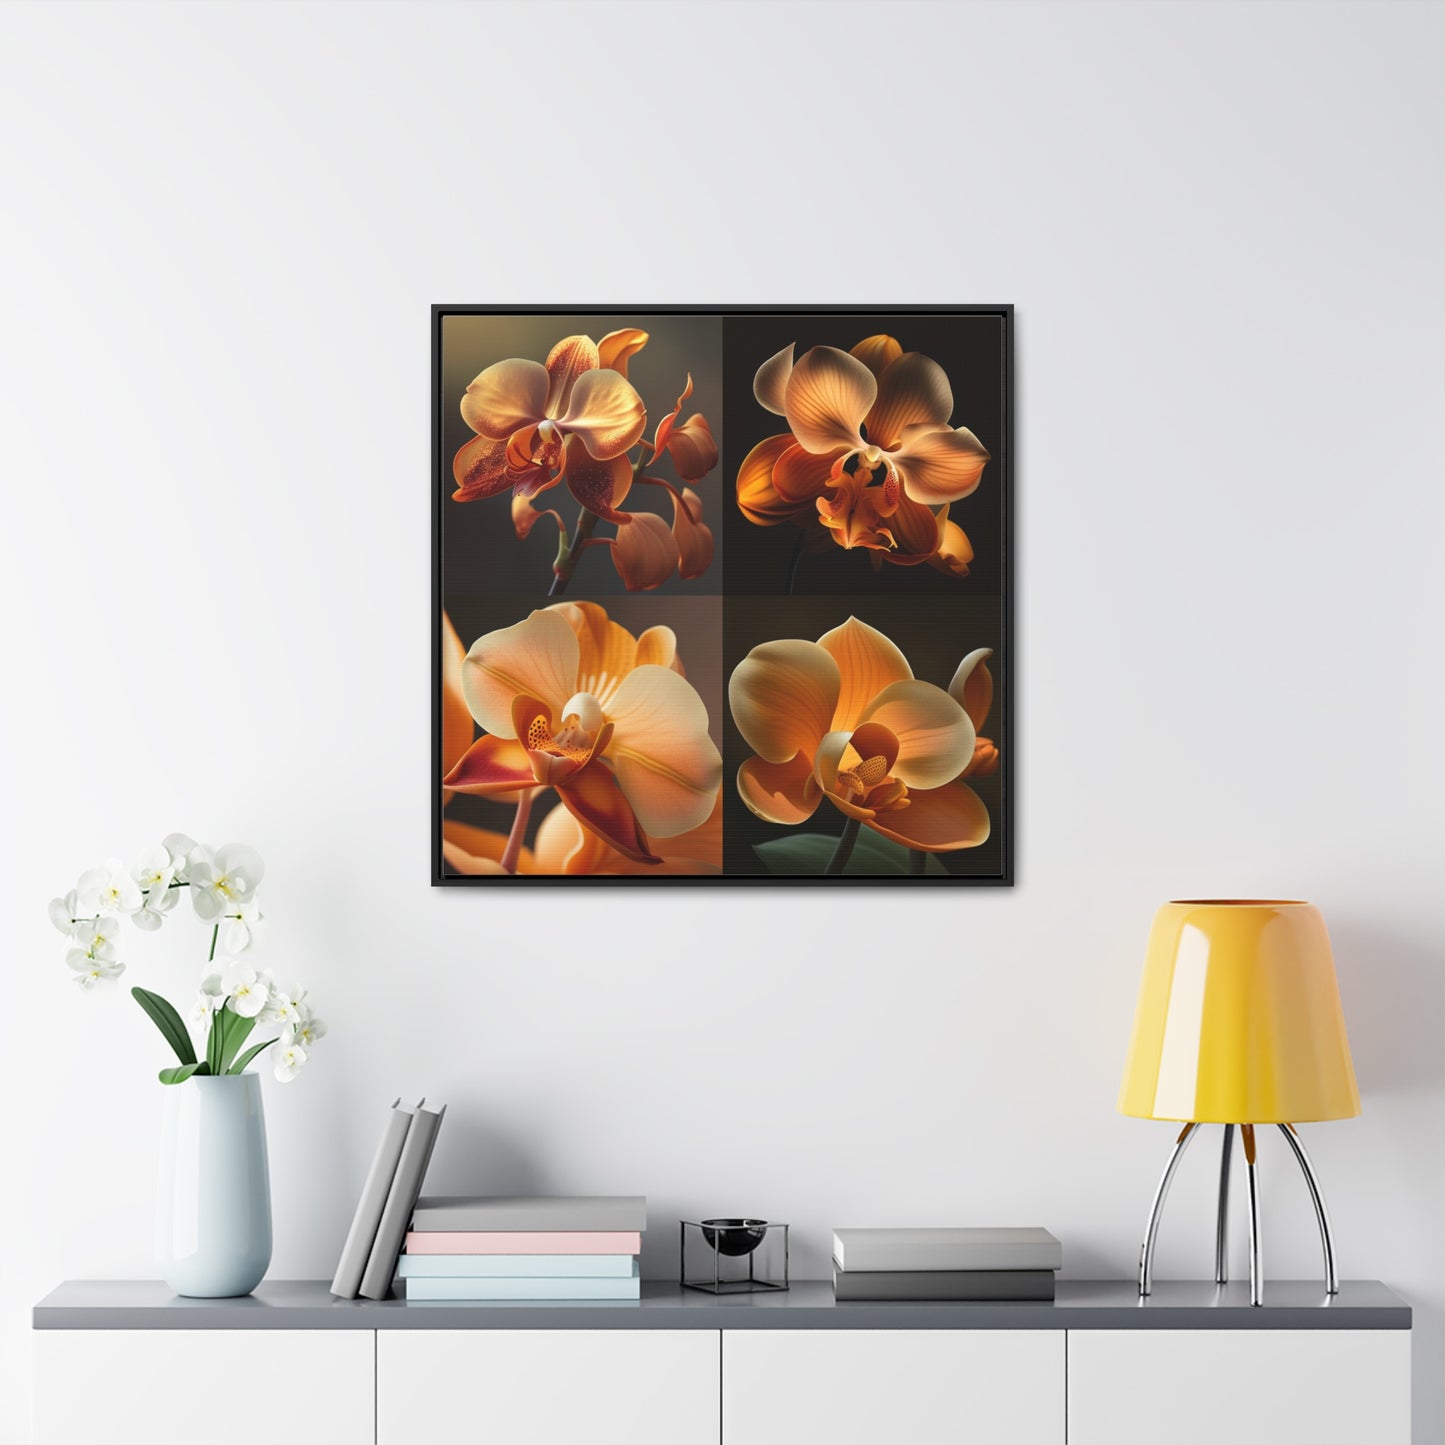 Gallery Canvas Wraps, Square Frame Orange Orchid 5